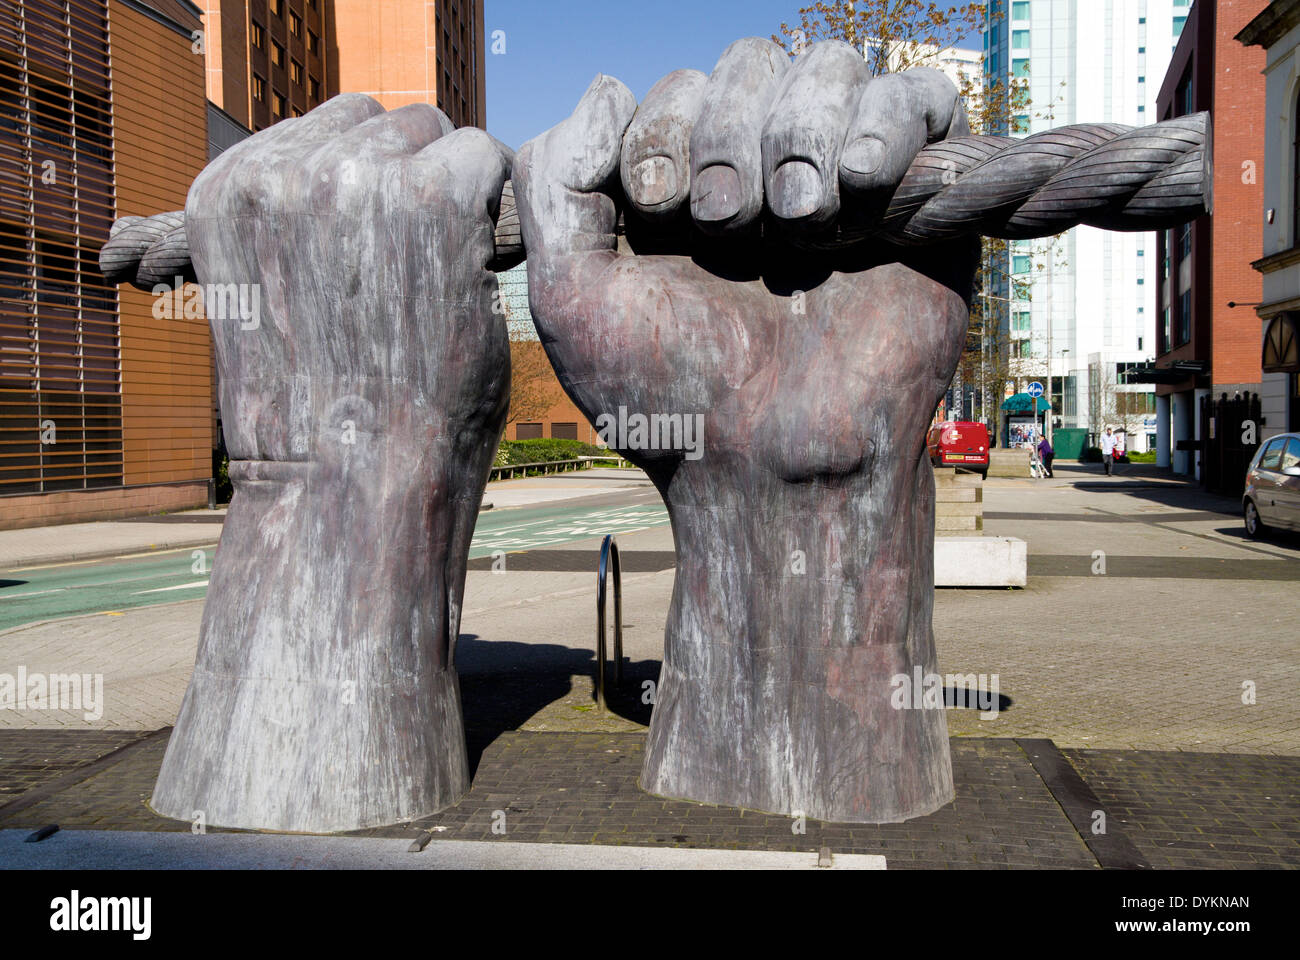 'All Hands' sculpture by Brian Fell, Depicting canal workers pulling on ropes, Custom House Street, Cardiff, Wales, UK. Stock Photo